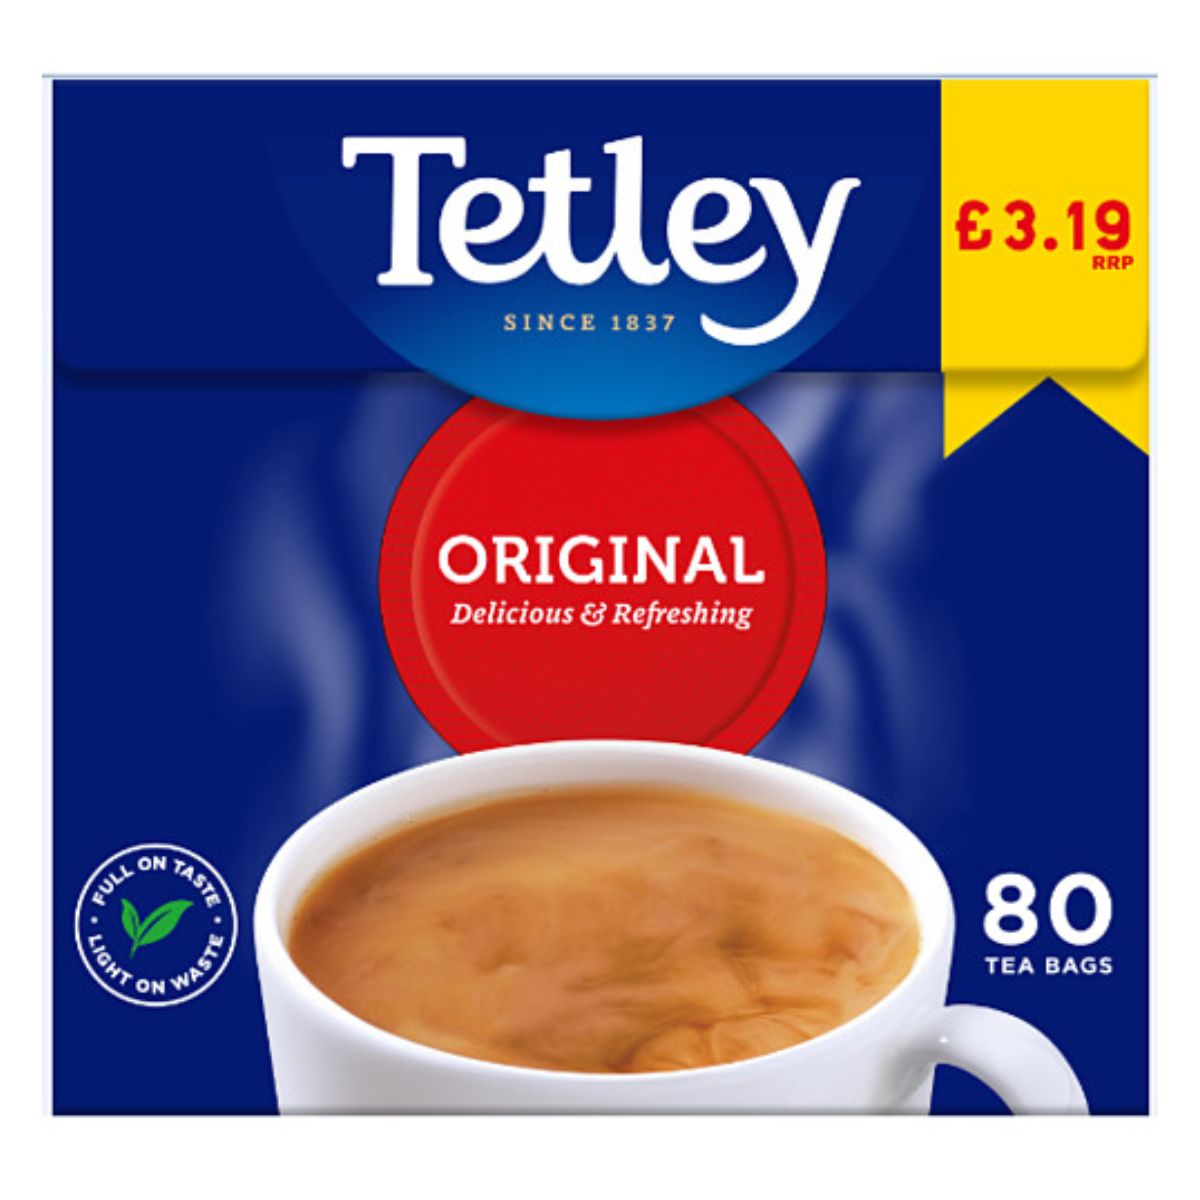 A box of Tetley - Decaf 80 Tea Bags - 250g, priced at £3.19. The package is blue with a red label stating "Delicious & Refreshing" and features a cup of tea pictured on the front.